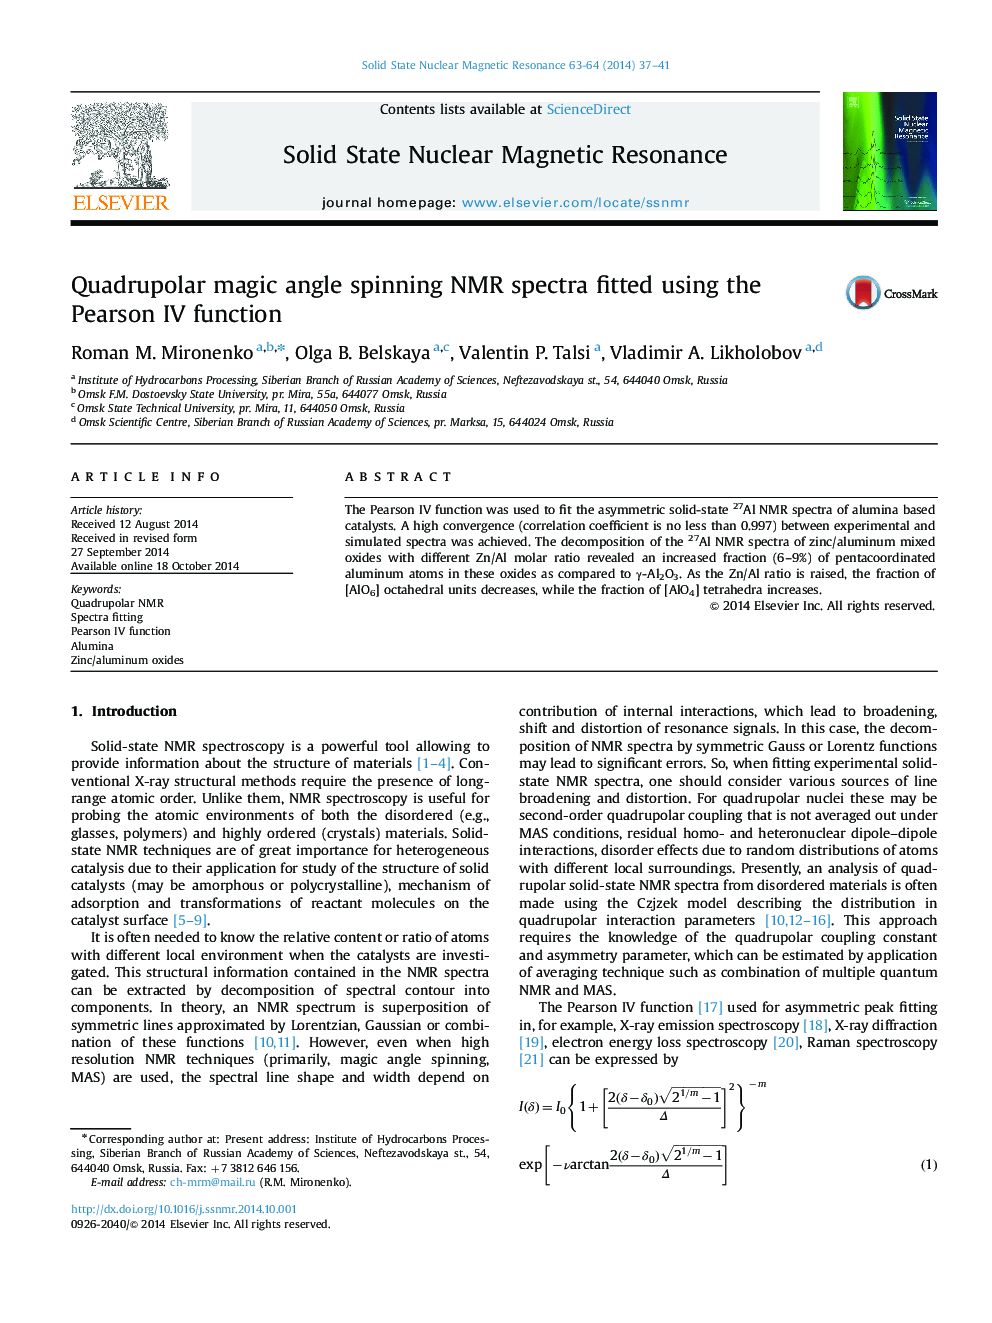 Quadrupolar magic angle spinning NMR spectra fitted using the Pearson IV function